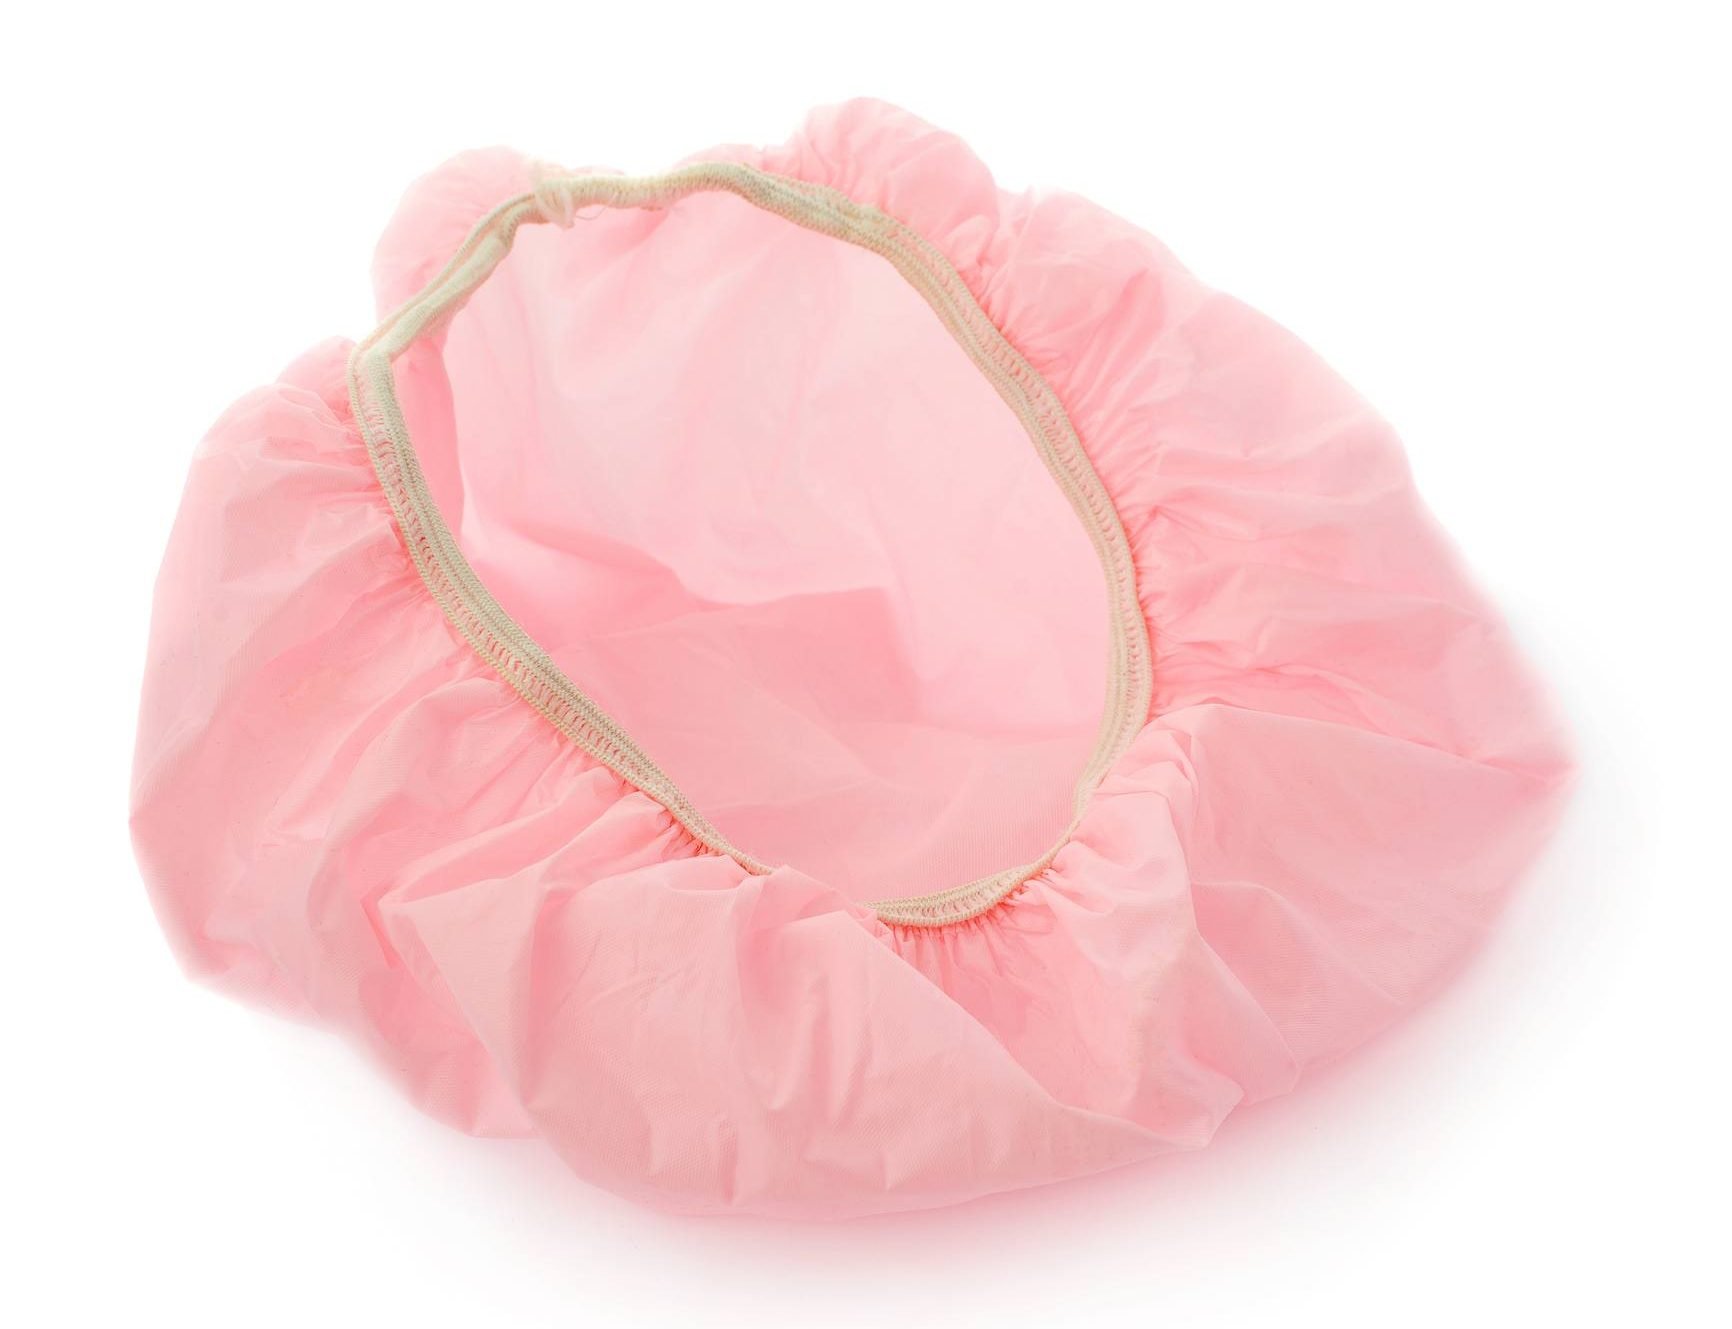 Shower cap isolated over the white background